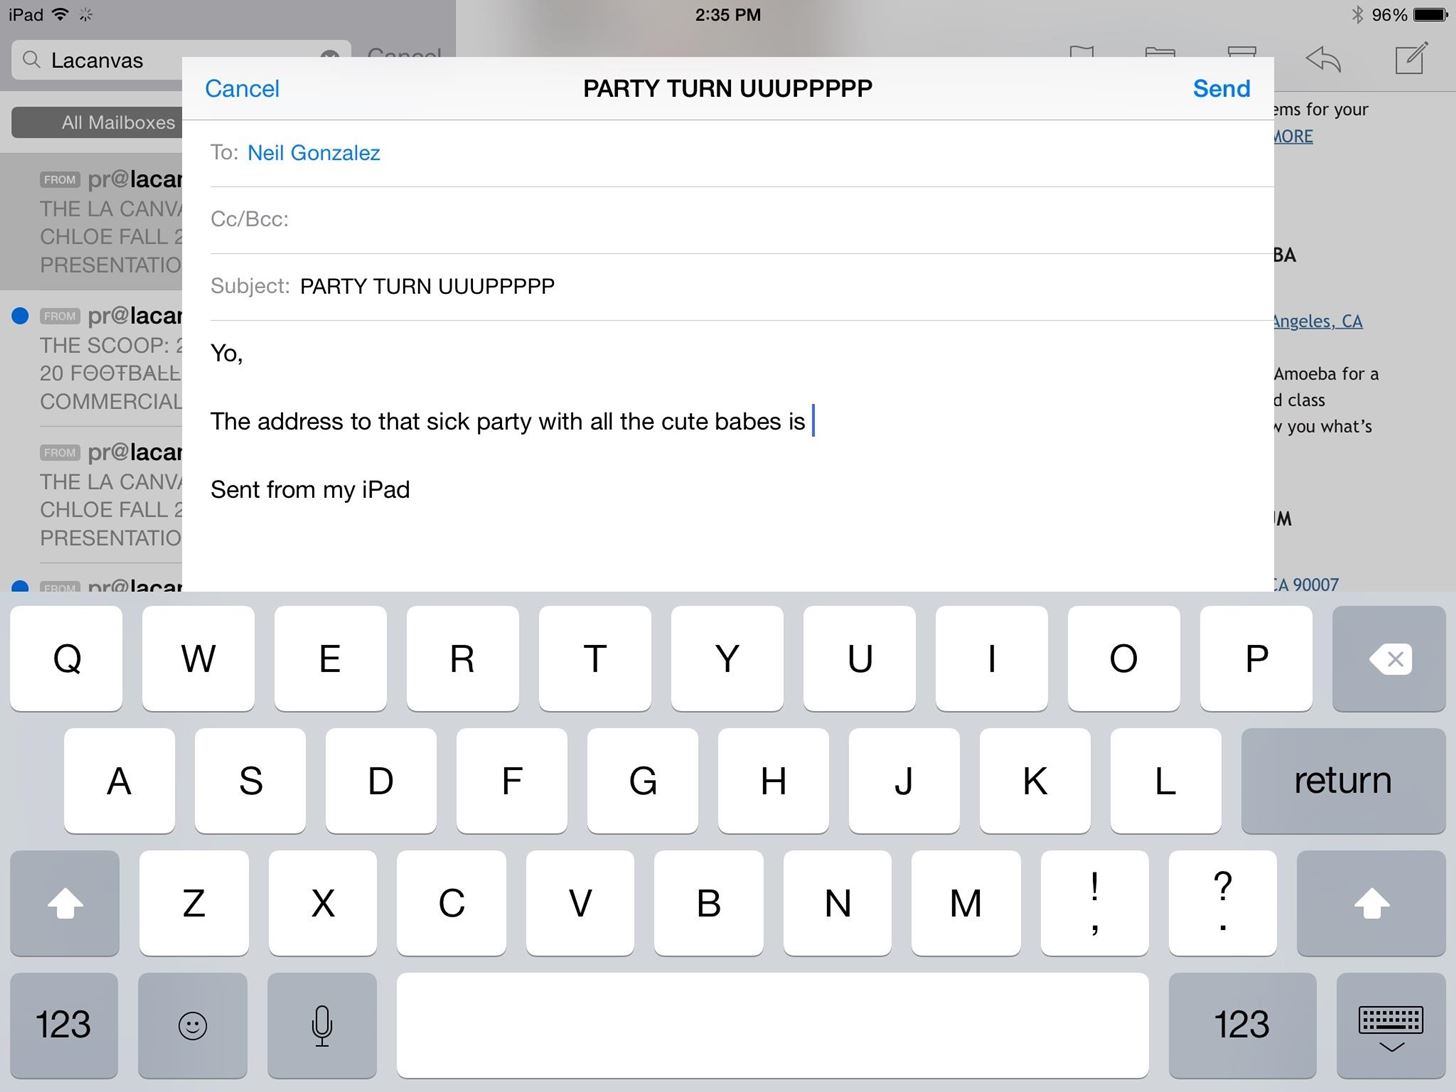 How to Minimize Email Drafts into Tabs on Your iPhone or iPad for Faster Access Later